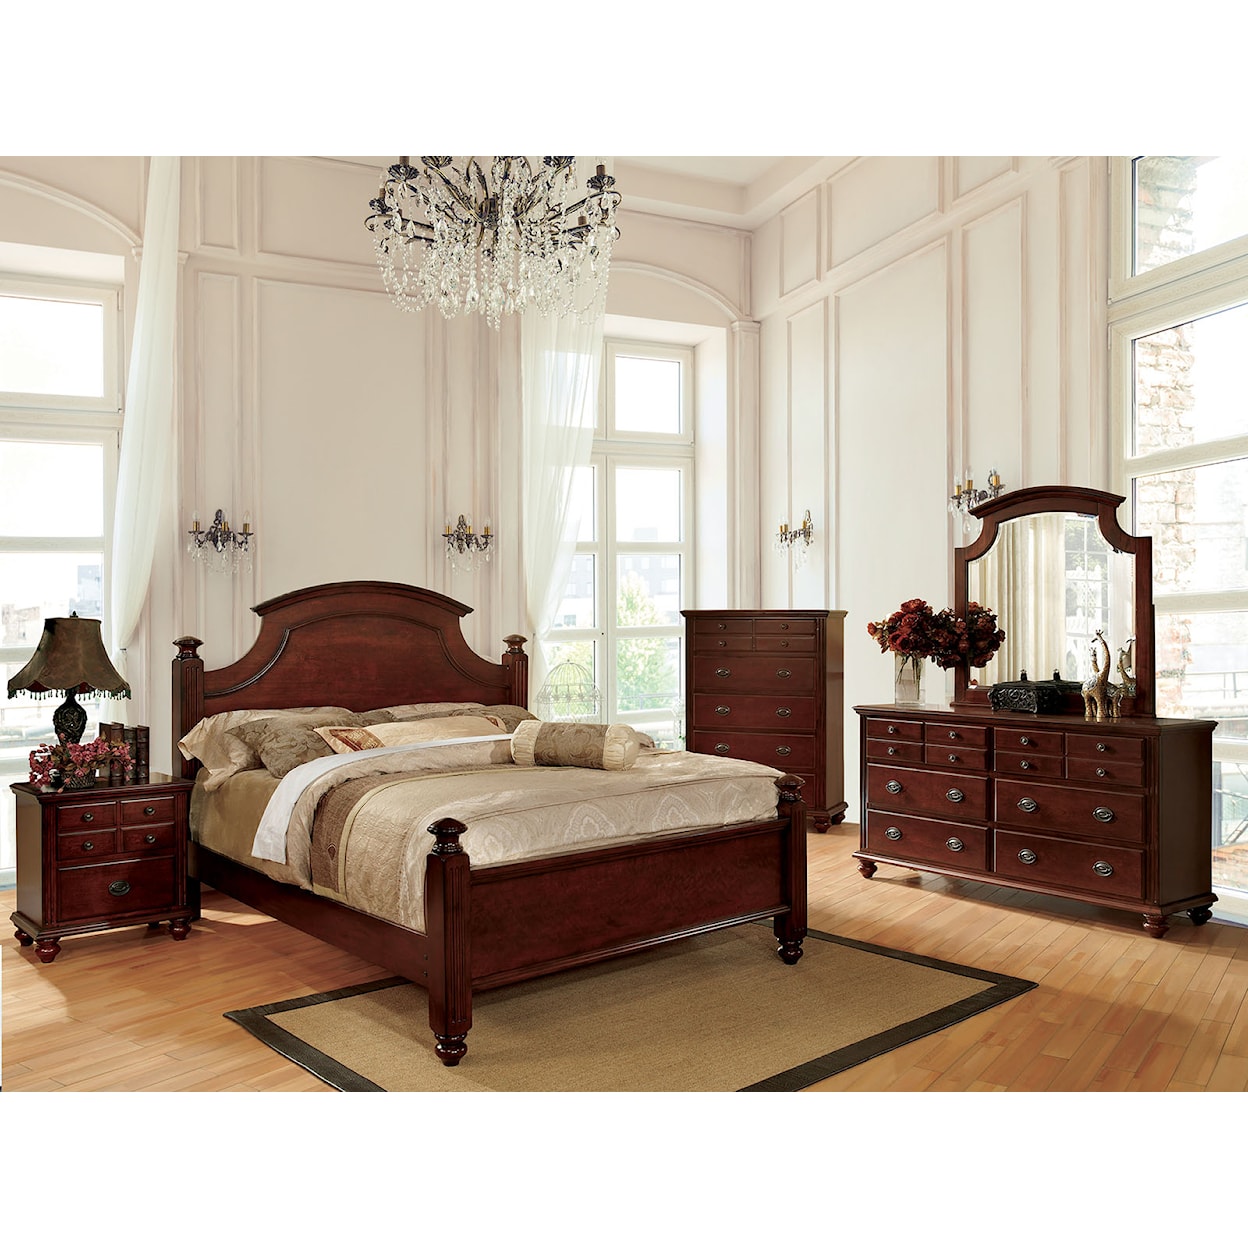 Furniture of America Gabrielle 4 Pc. Queen Bedroom Set